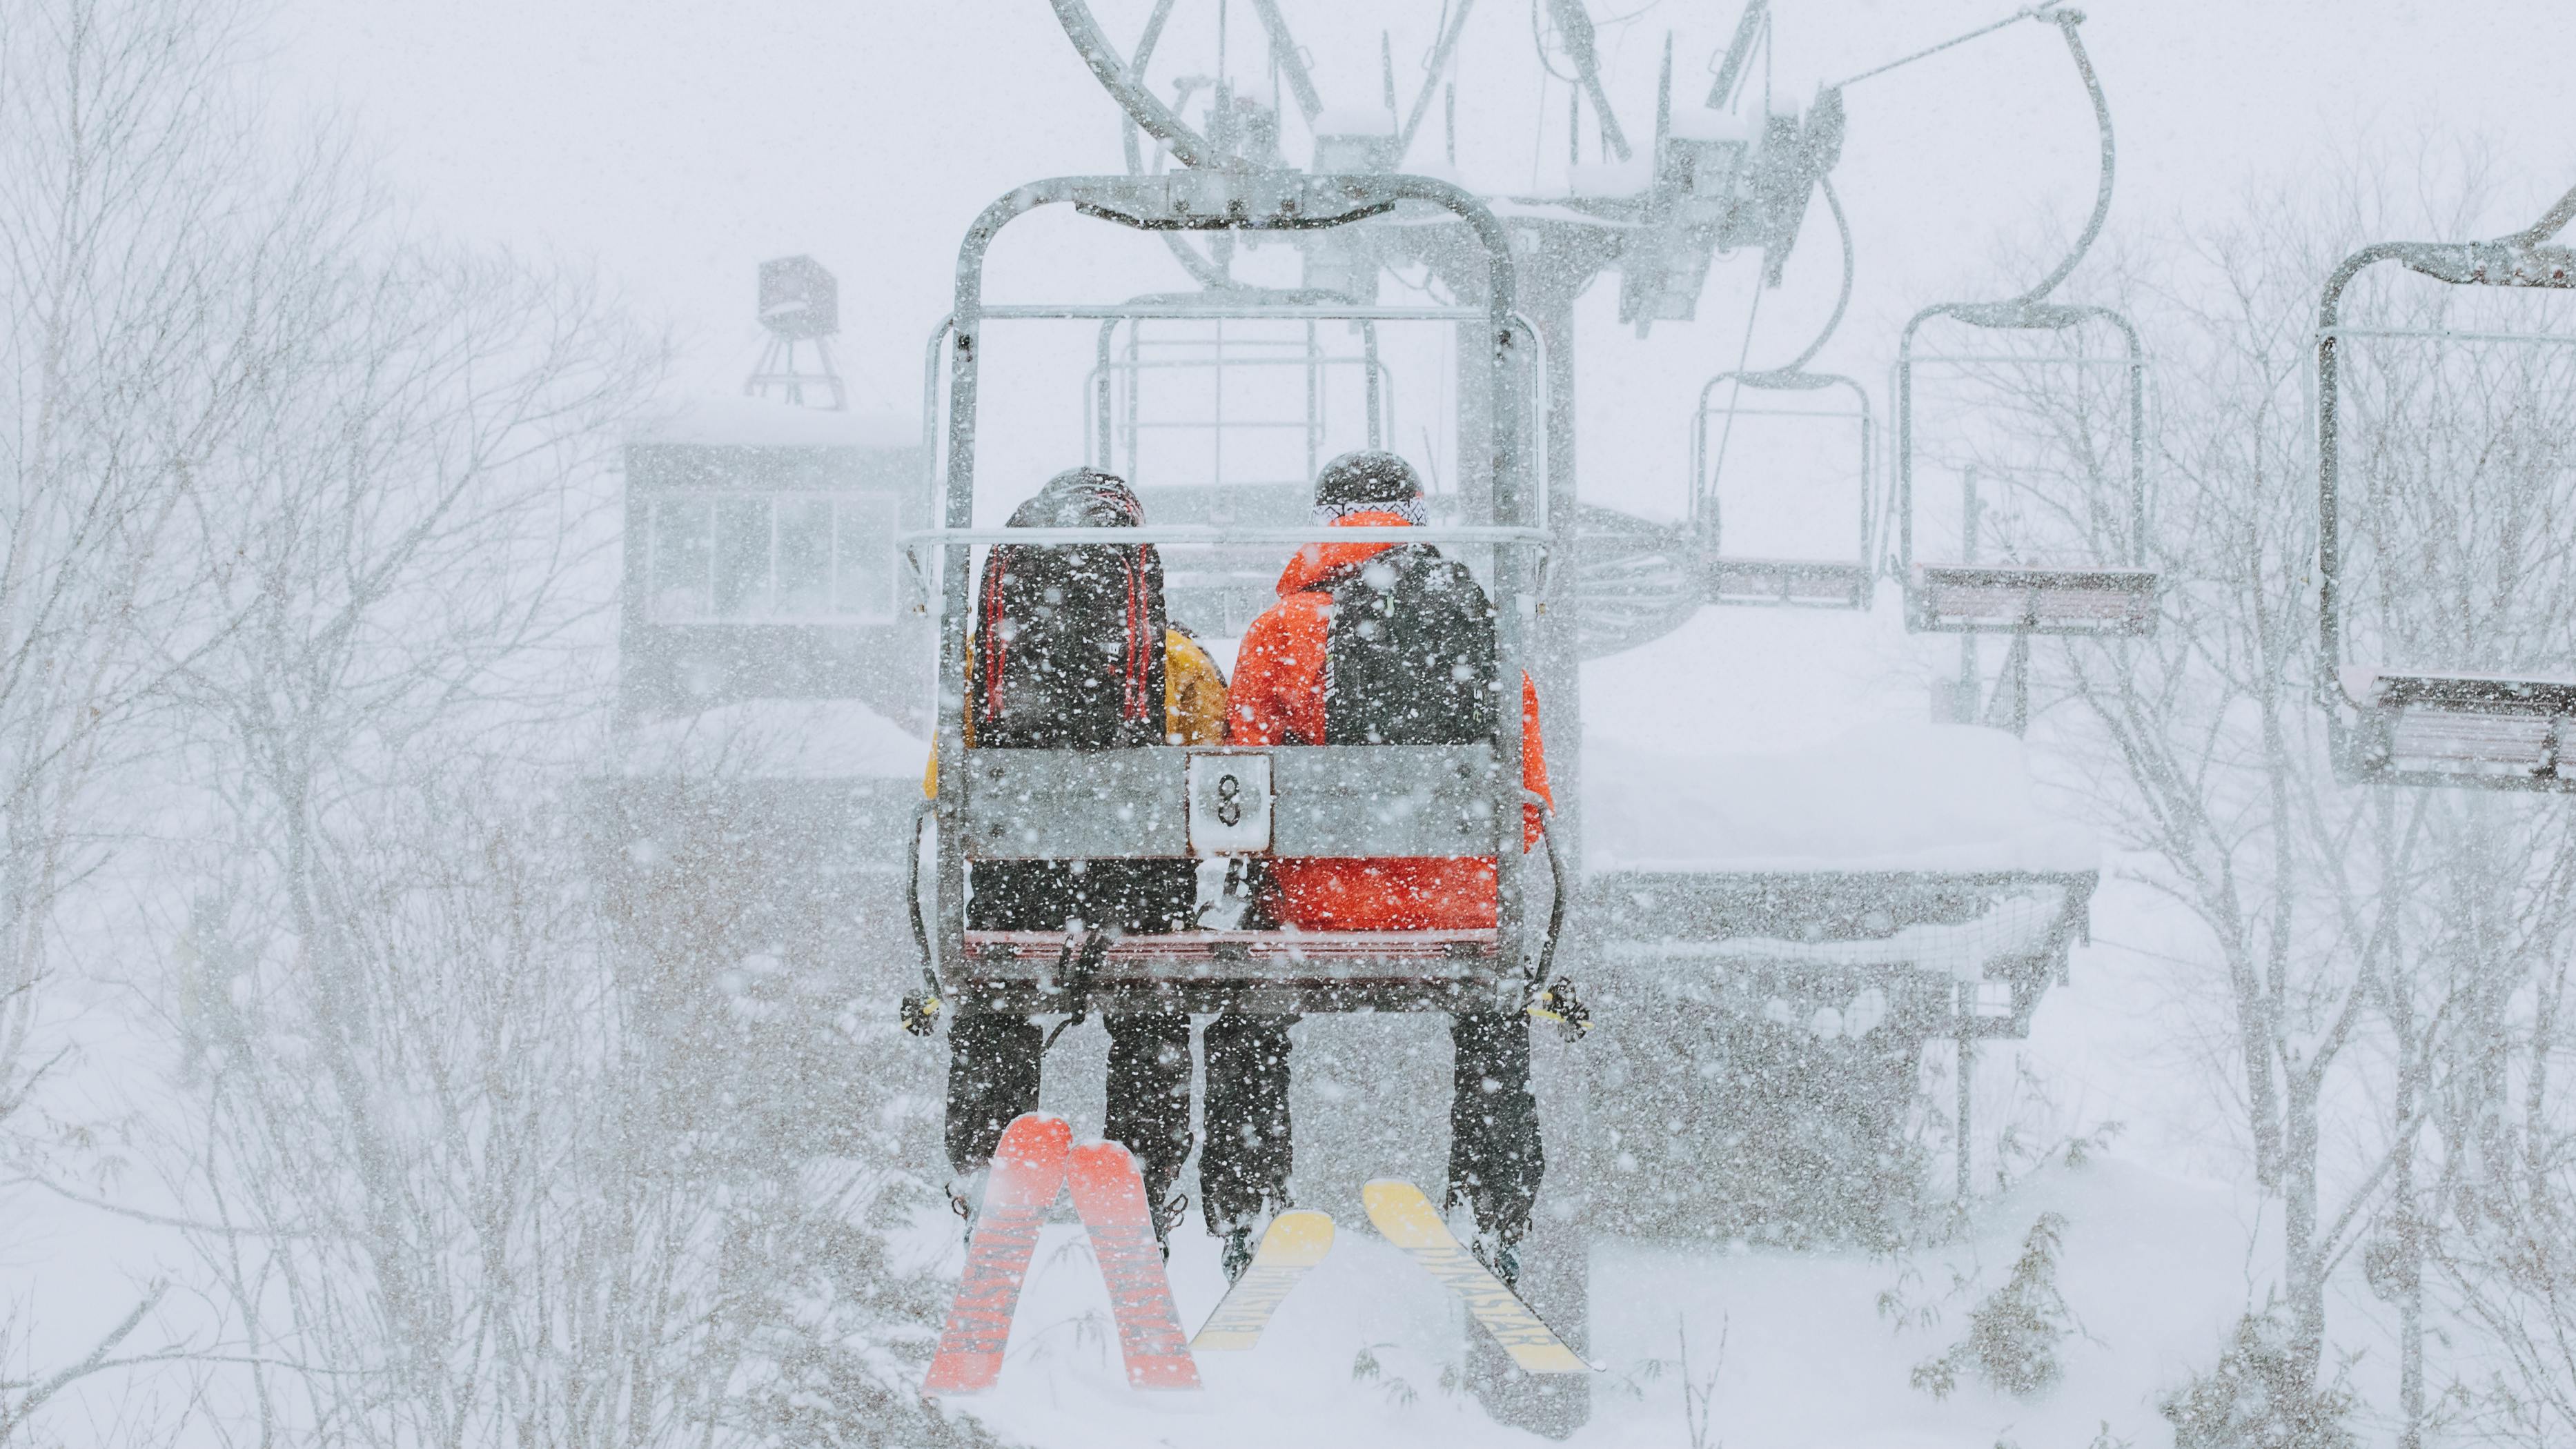 Two skiers sit on a chairlift on a snowy day.